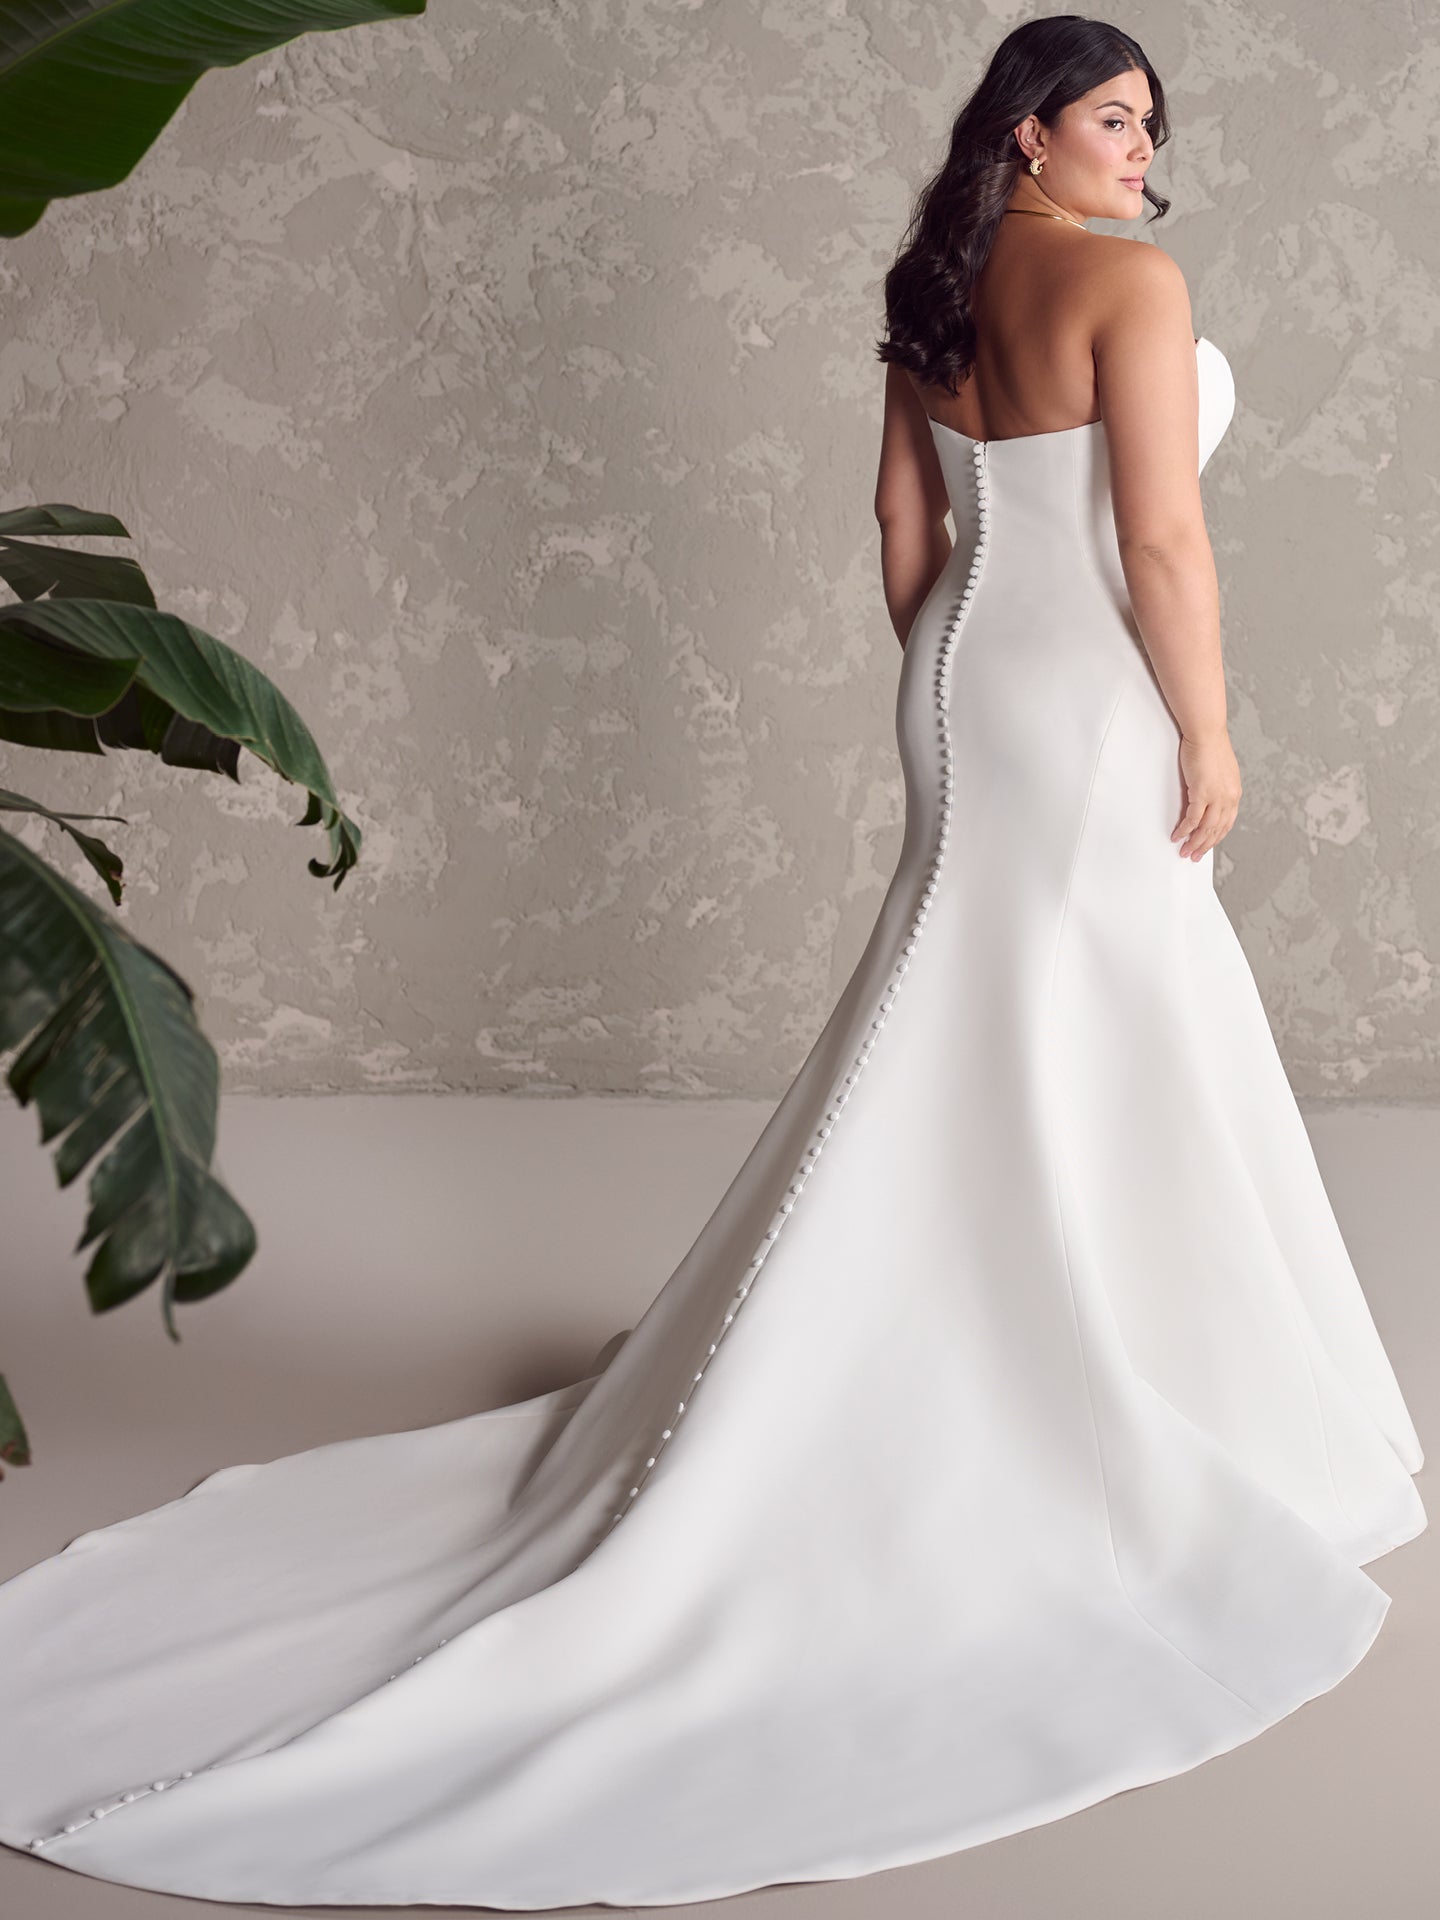 Chic And Simple Fit-and-Flare Gown With Buttons by Maggie Sottero - Image 2